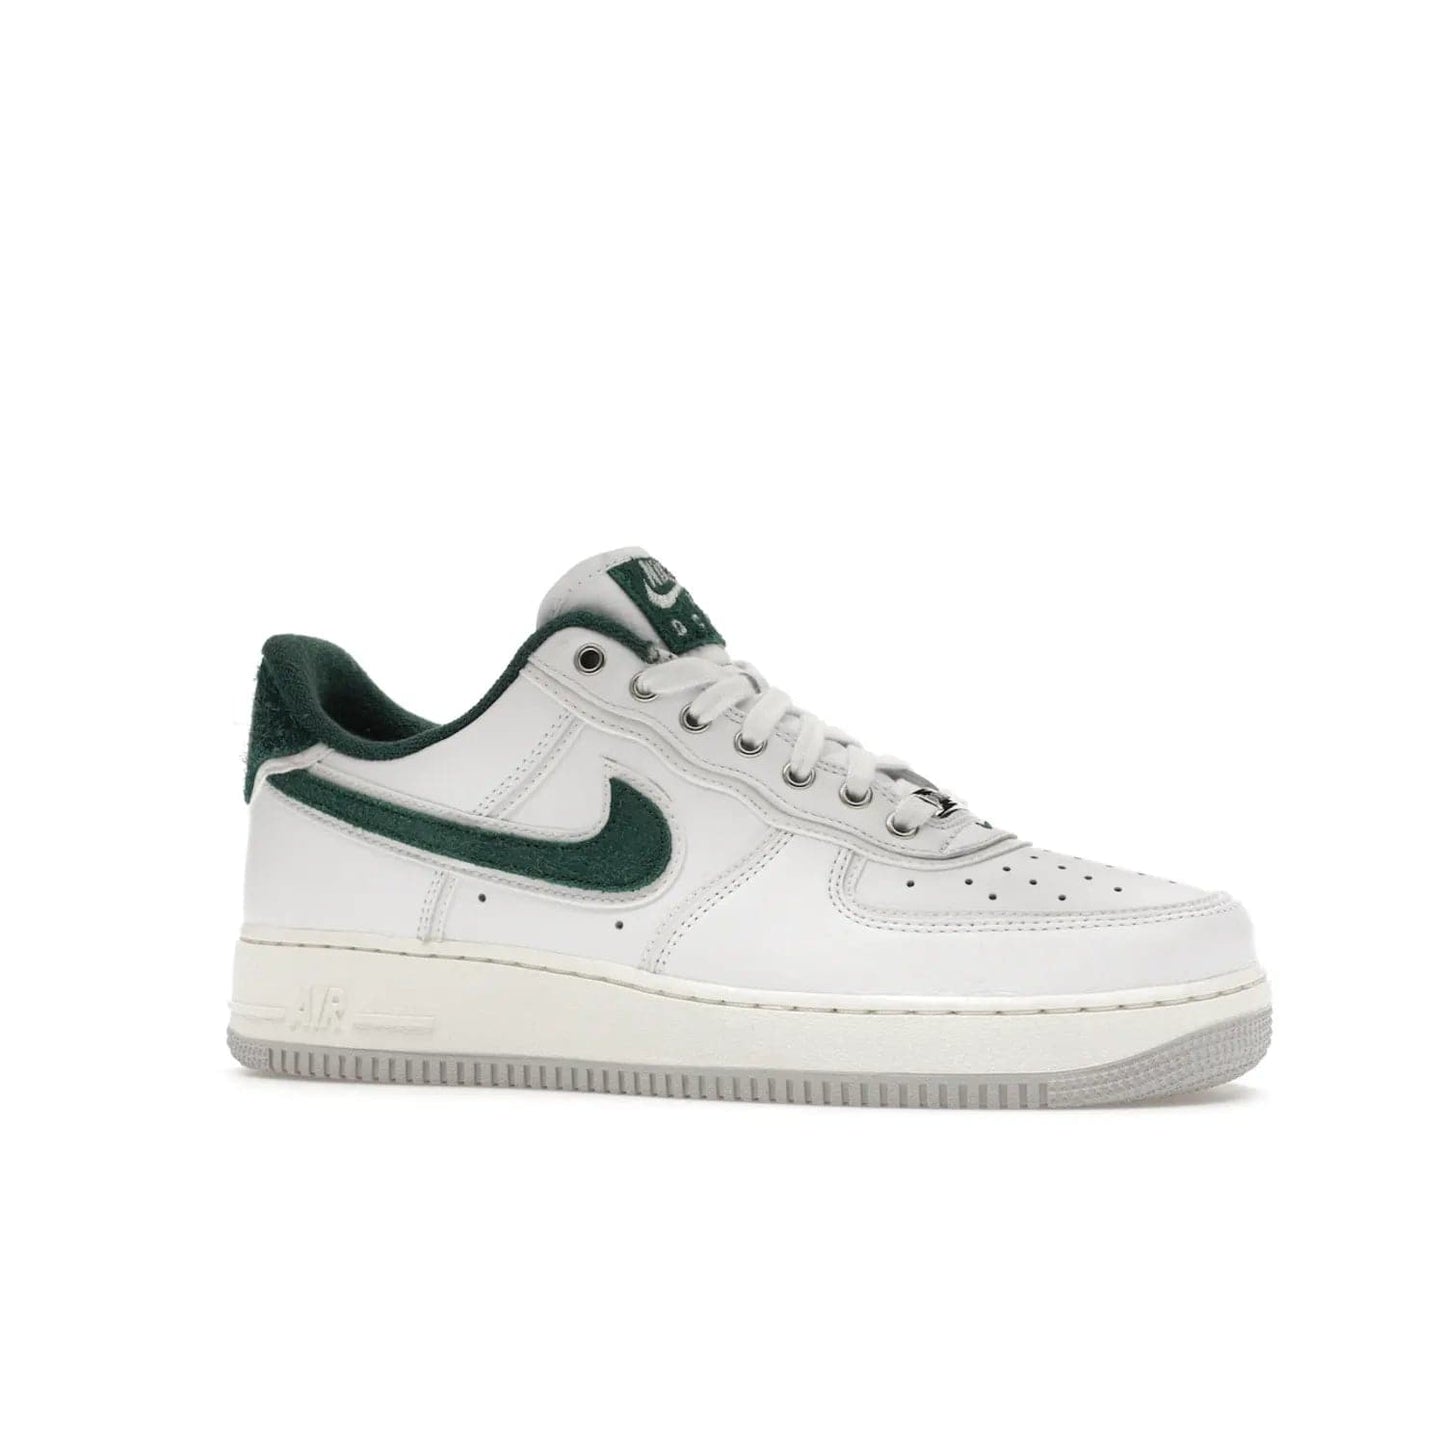 Nike Air Force 1 Low '07 Premium University of Oregon PE - Image 3 - Only at www.BallersClubKickz.com - The Nike Air Force 1 Low '07 Premium. Special Oregon University colorway. White base with green and sail accents. Cushioned rubber midsole. Comfort and style. Support your school!